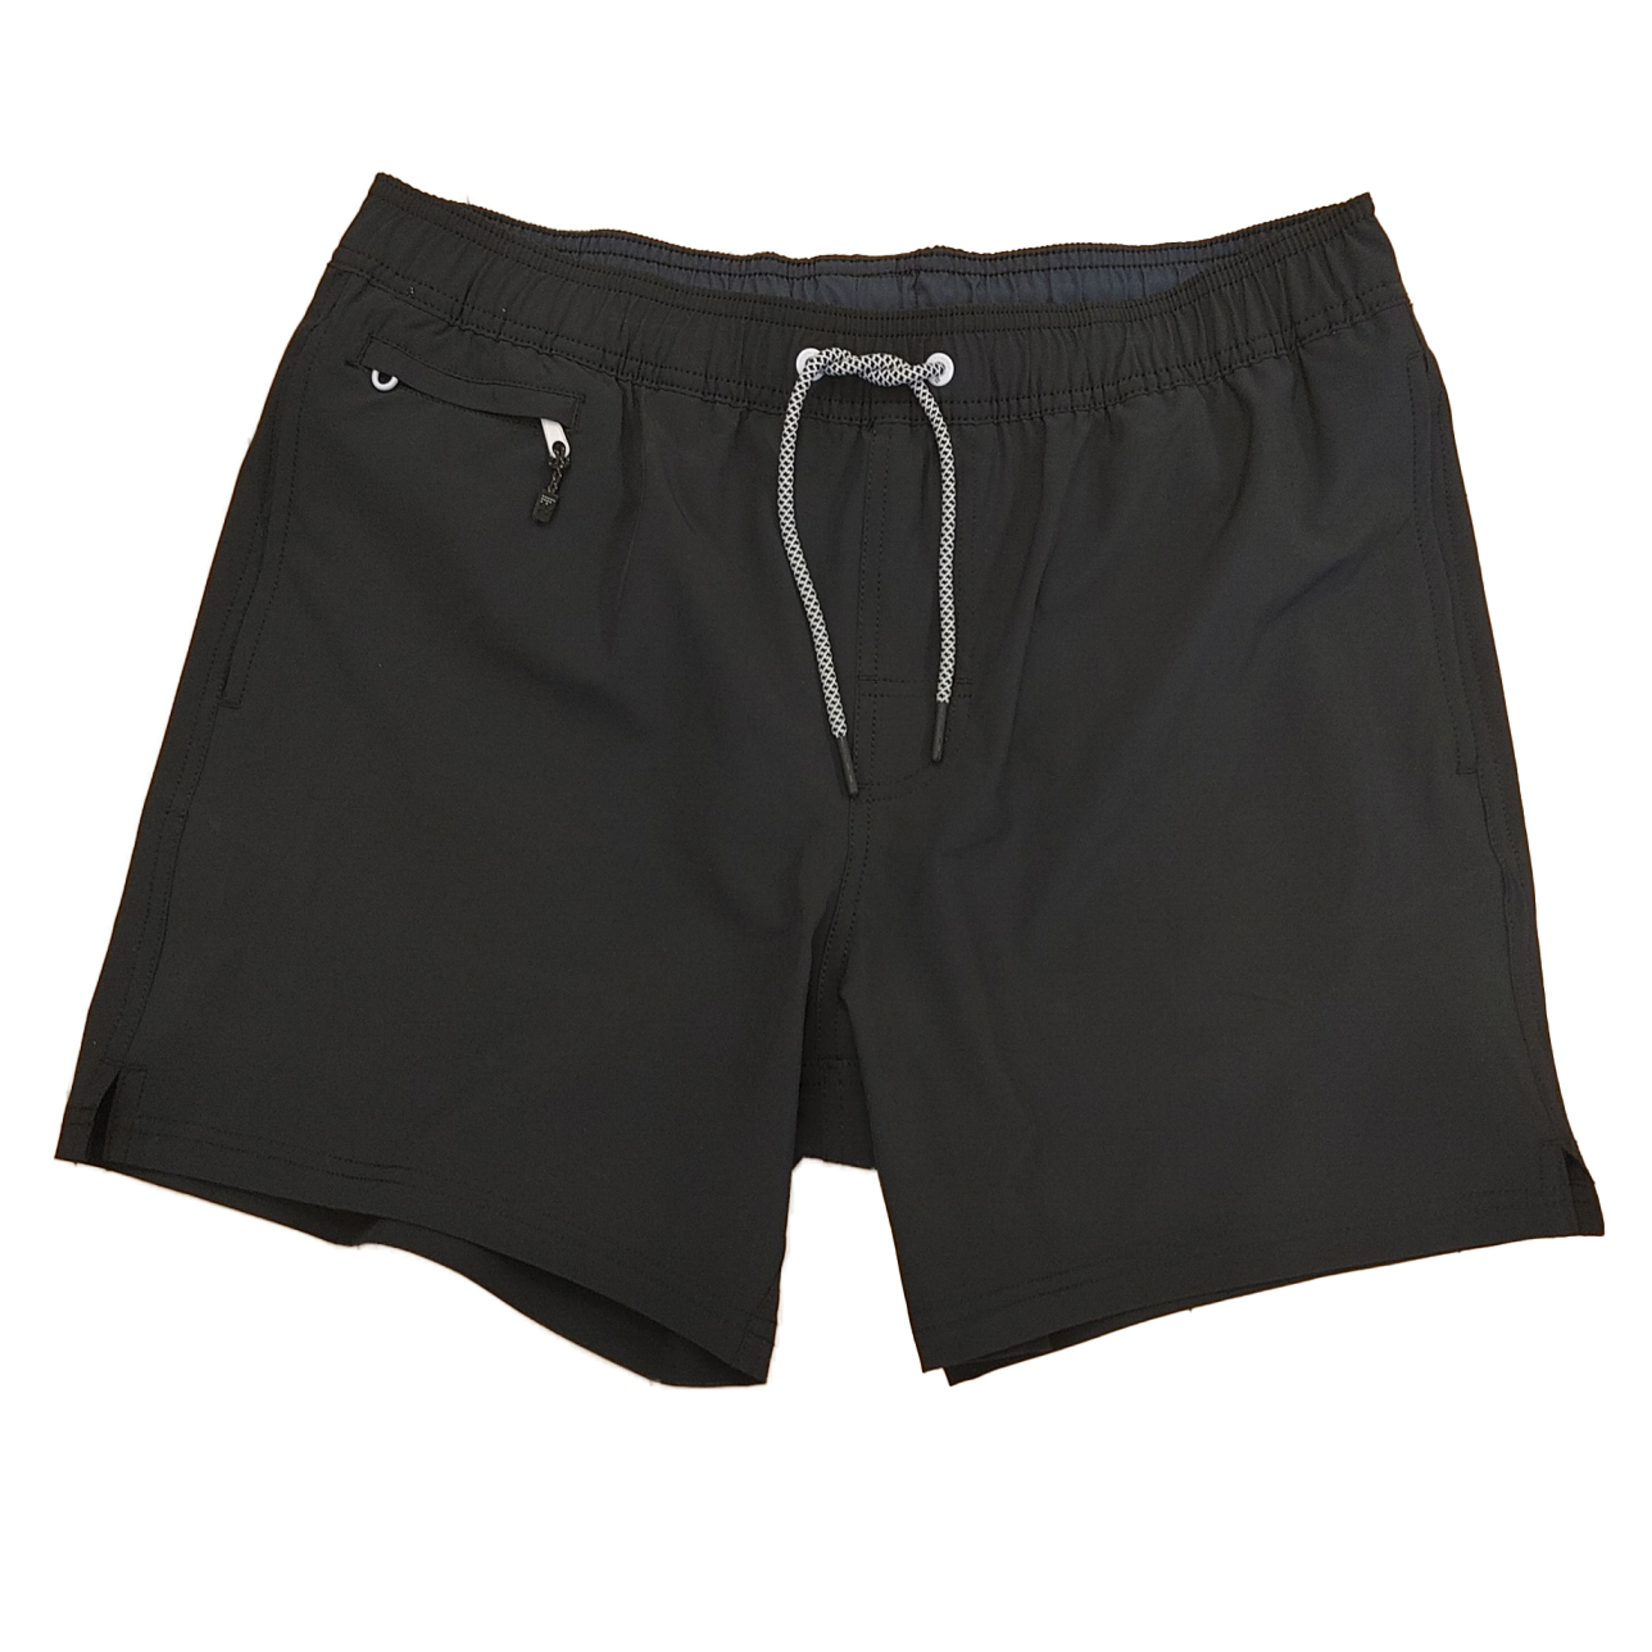 Point Zero Point Zero recycled swimshorts with pockets, 5 1/2" inseam